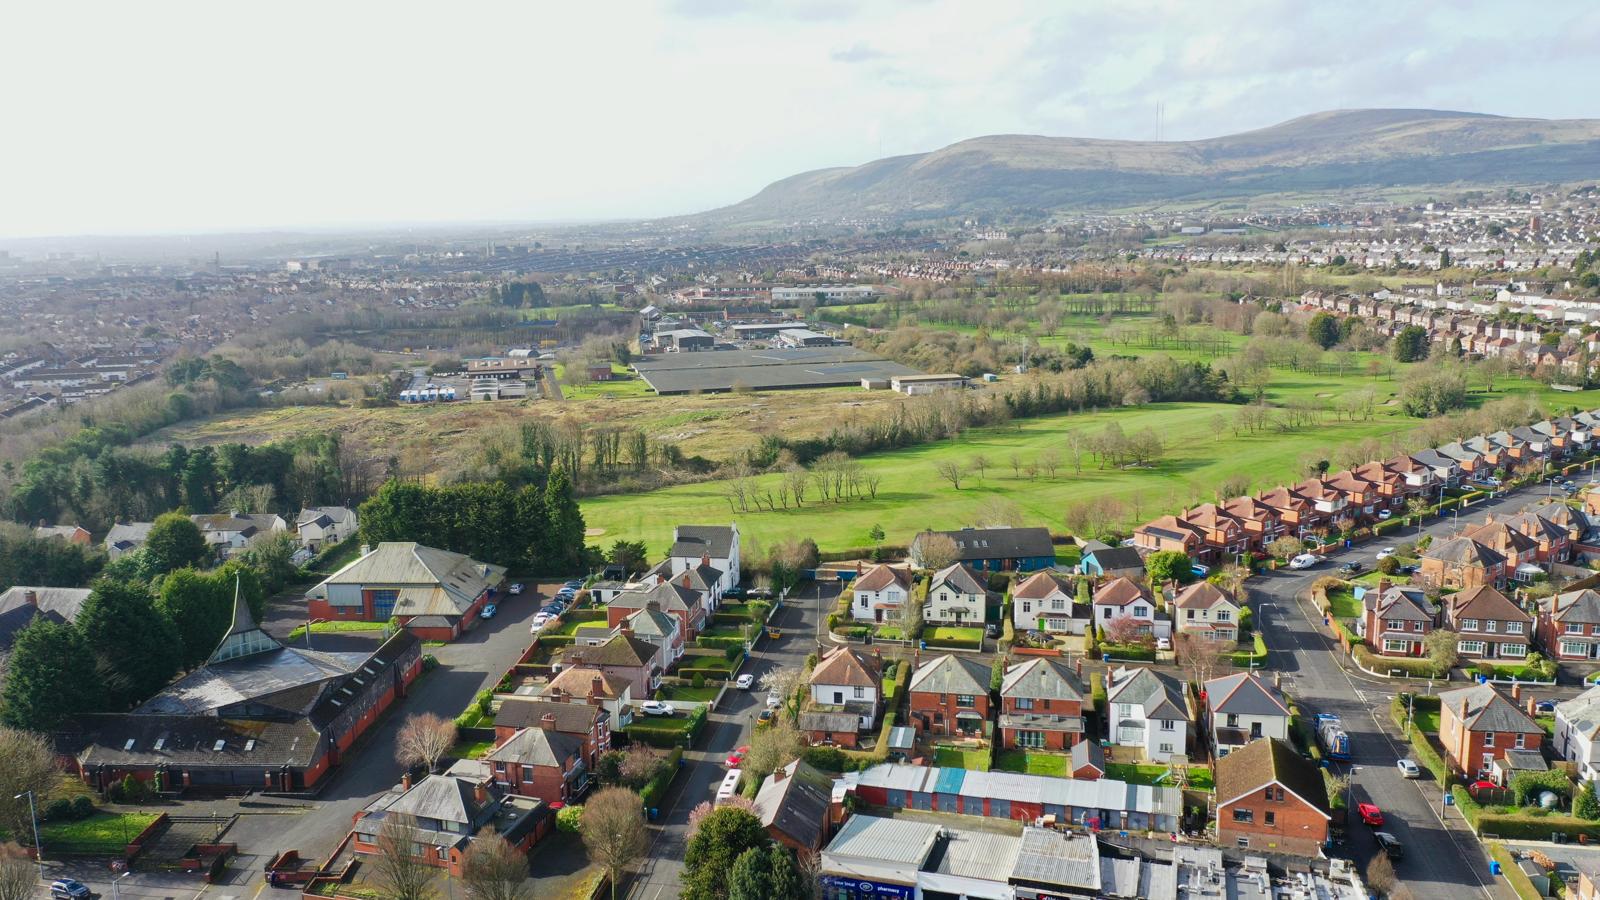 SOCIAL HOUSING PLANS? The Westland Road and Cavehill Road area